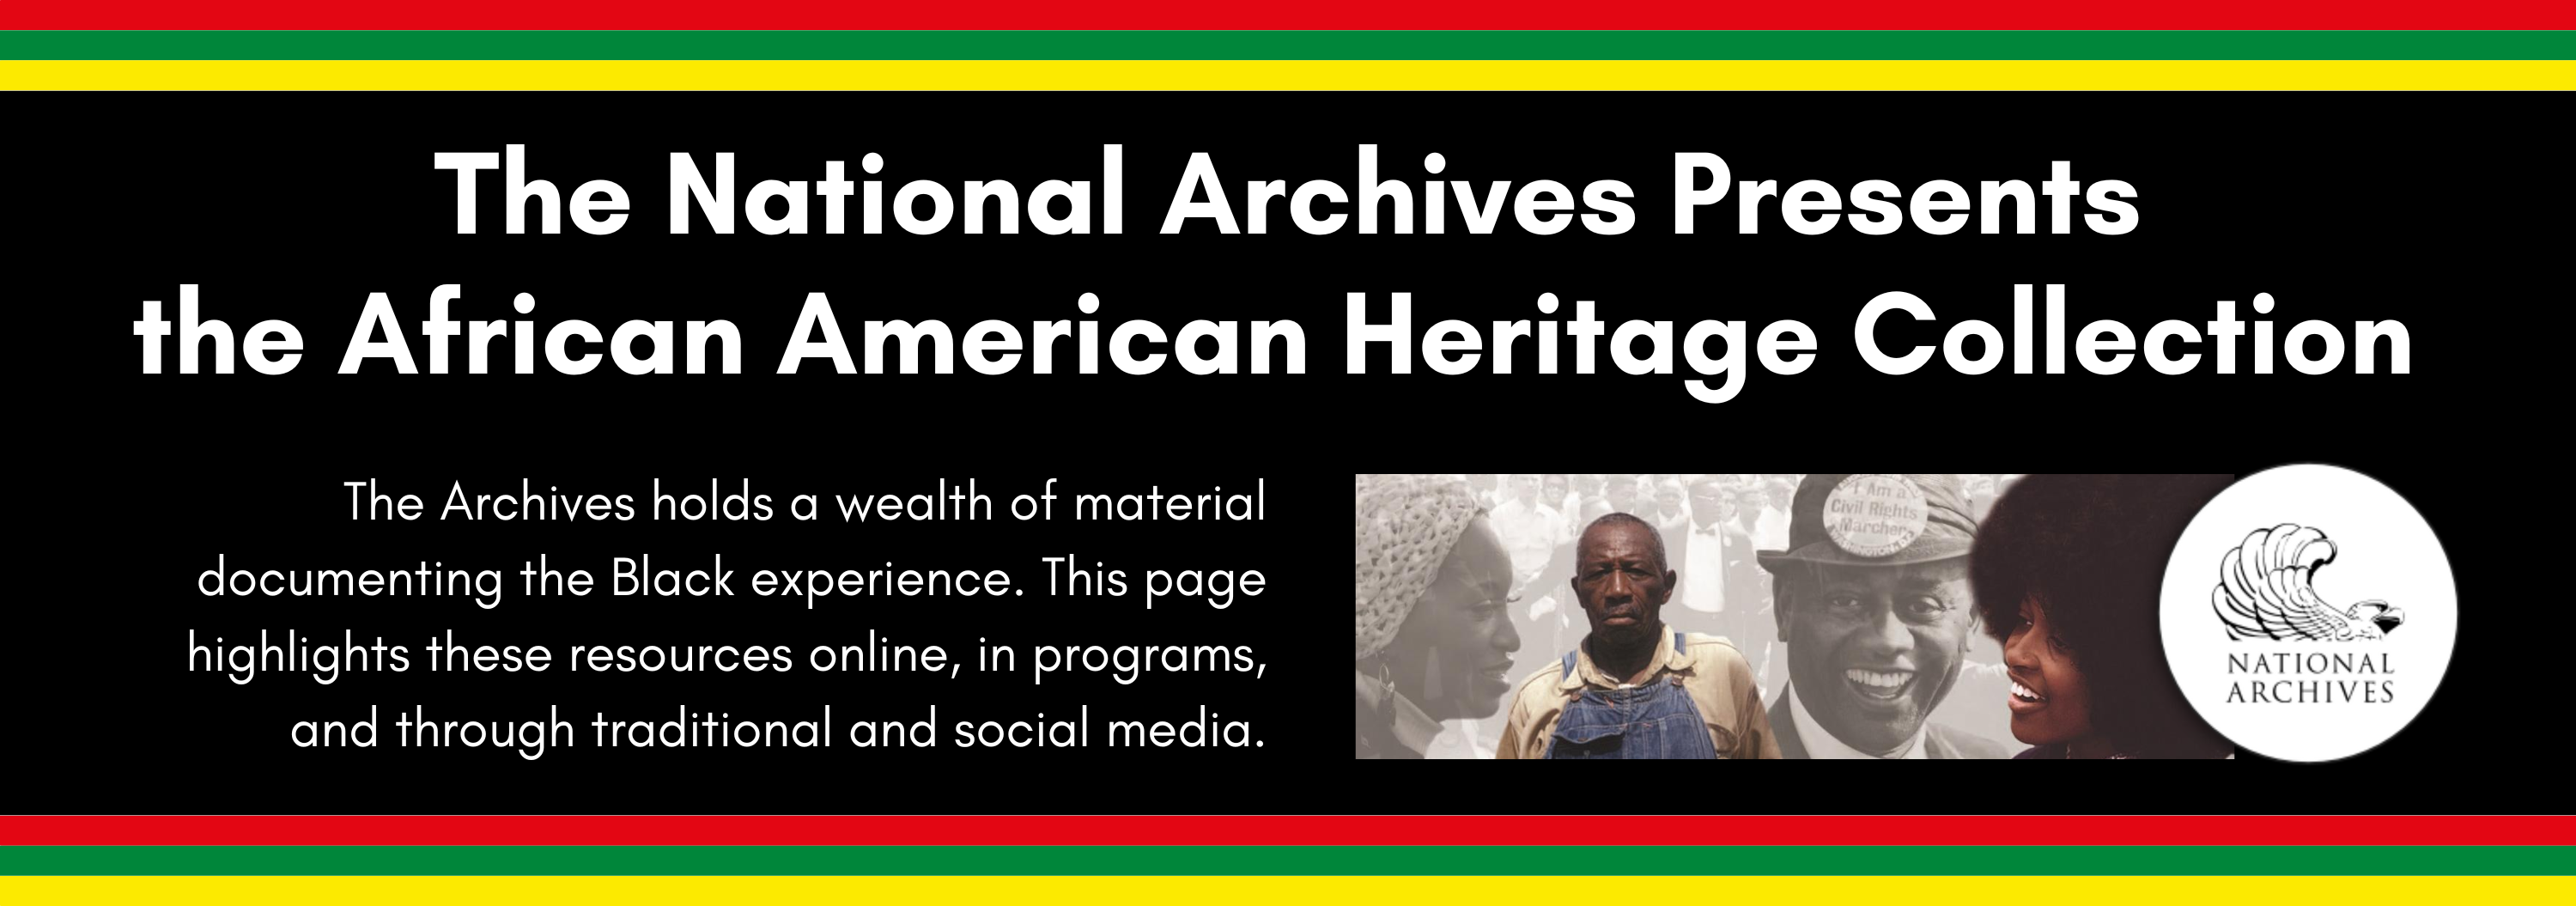 The National Archives holds a wealth of material documenting the Black experience. 